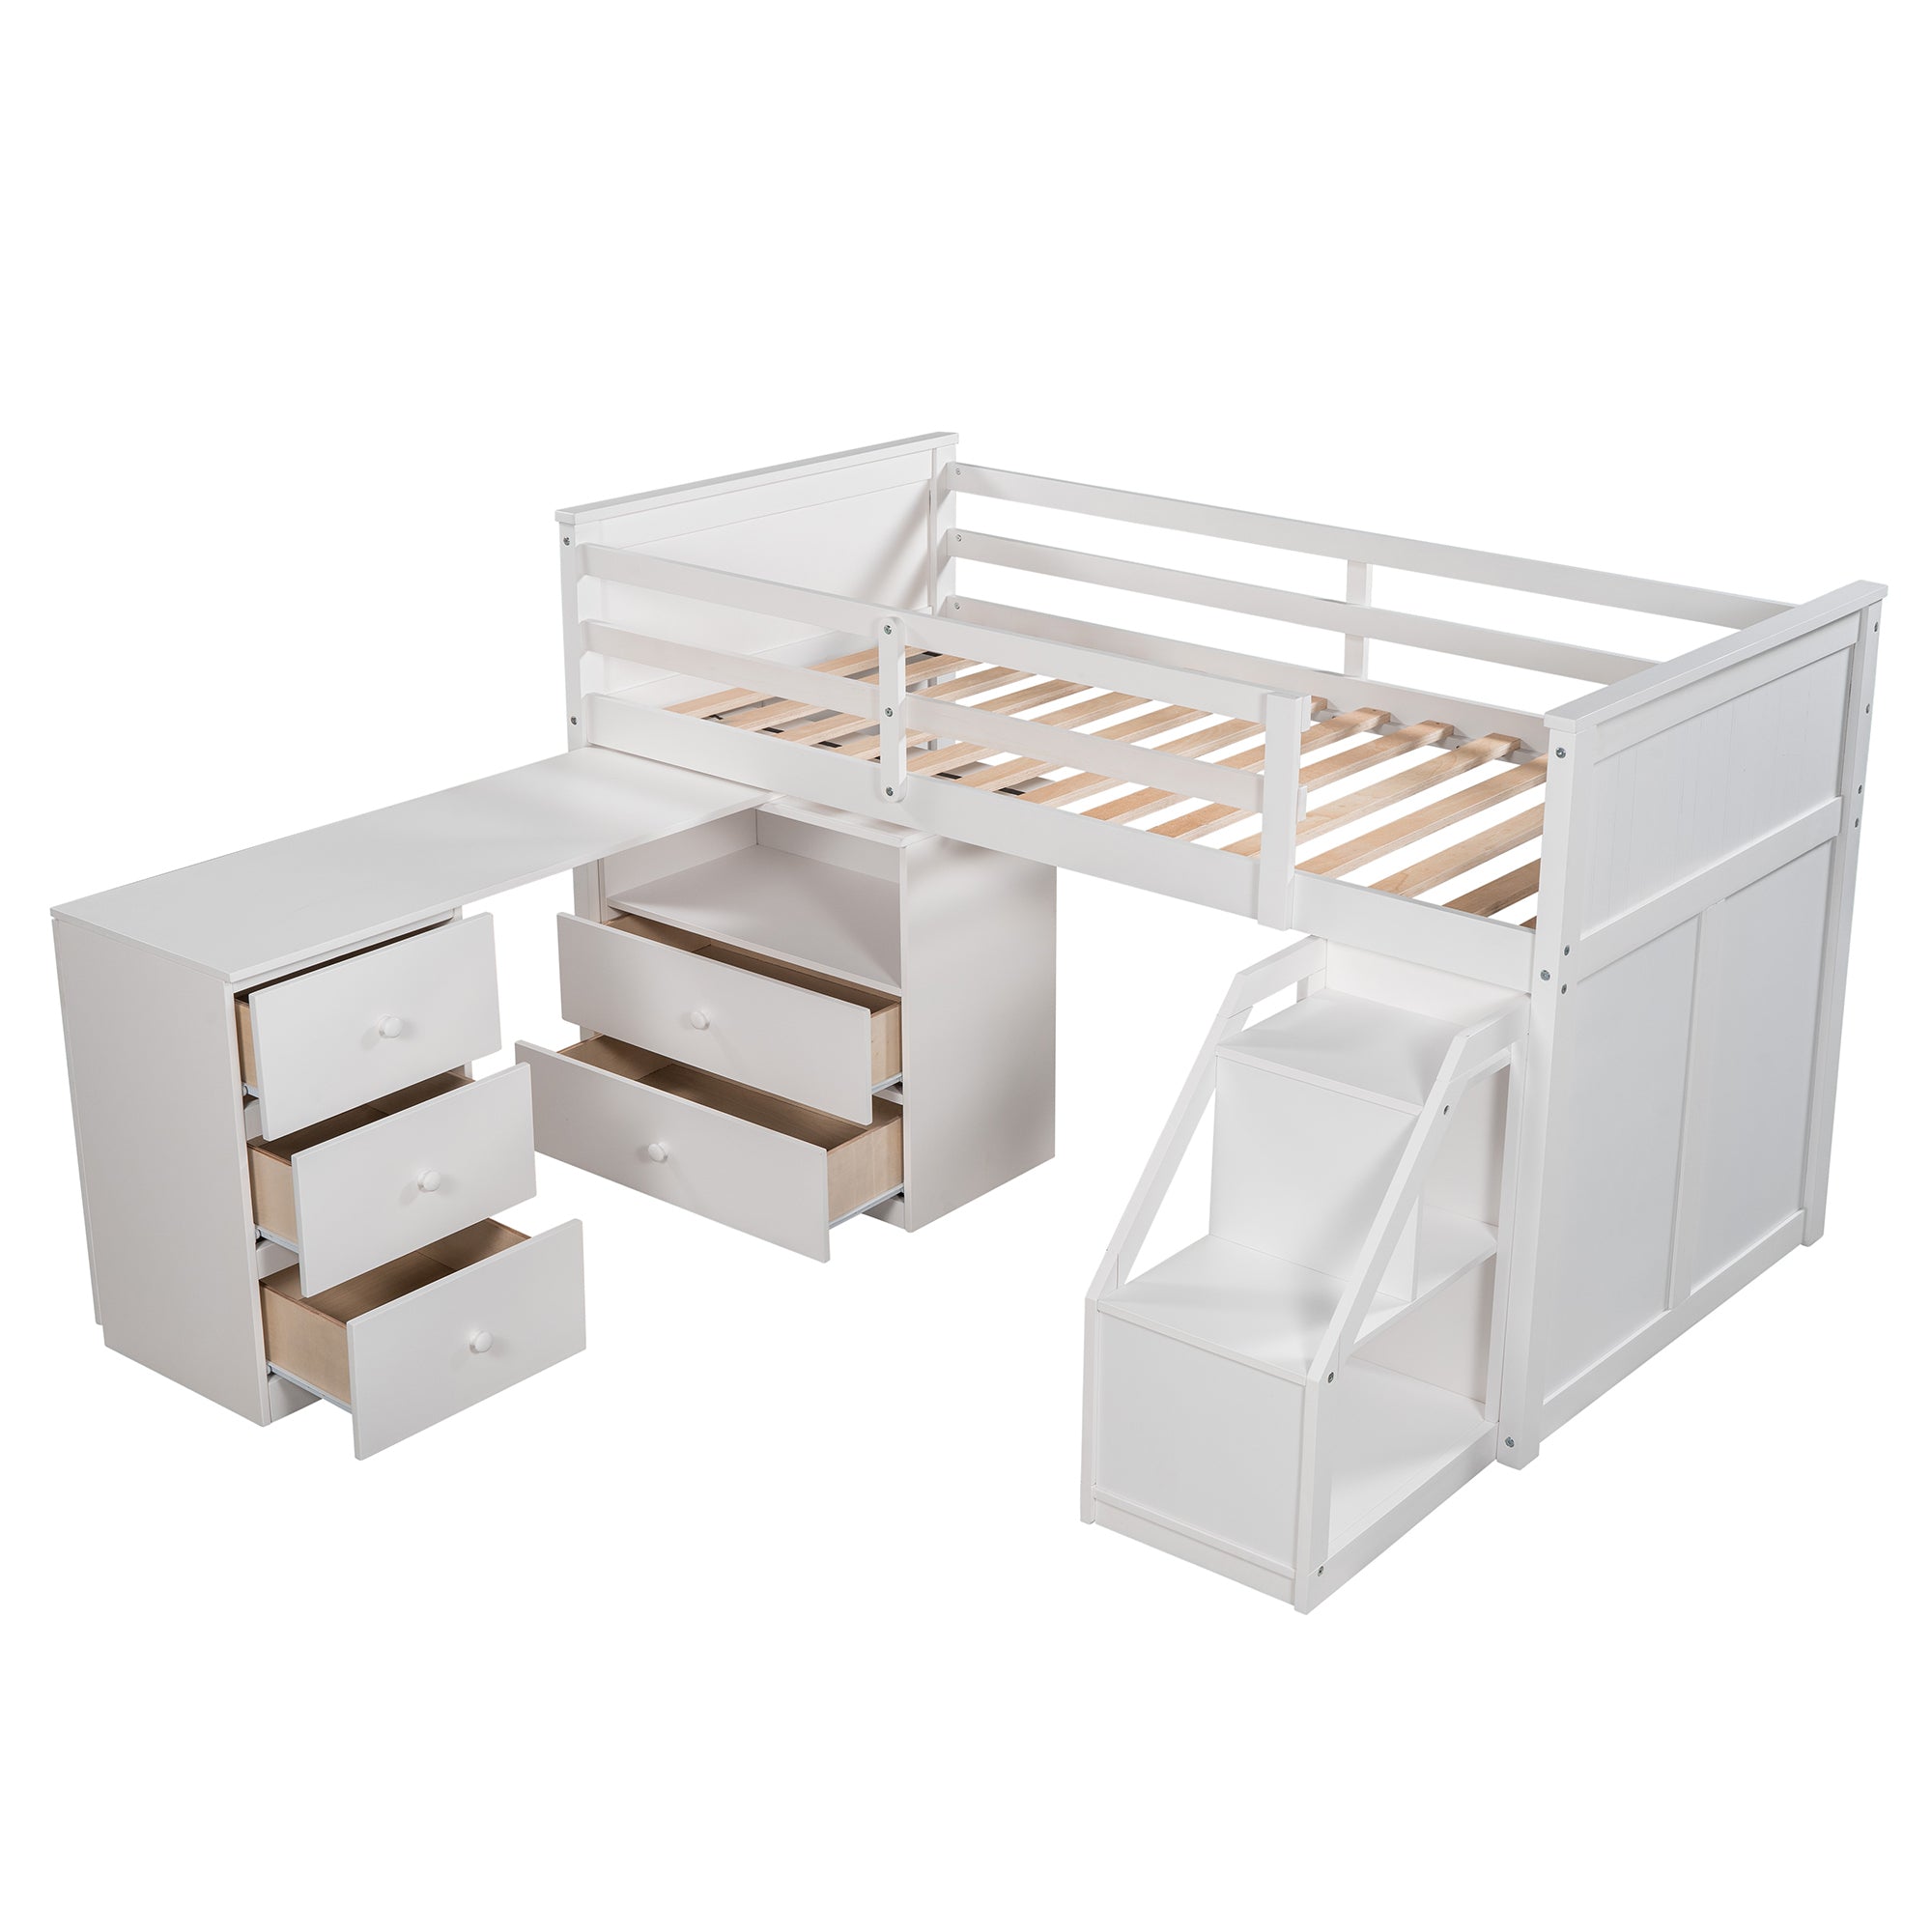 Loft Bed Low Study Twin Size Loft Bed With Storage Steps and Portable Desk (White)